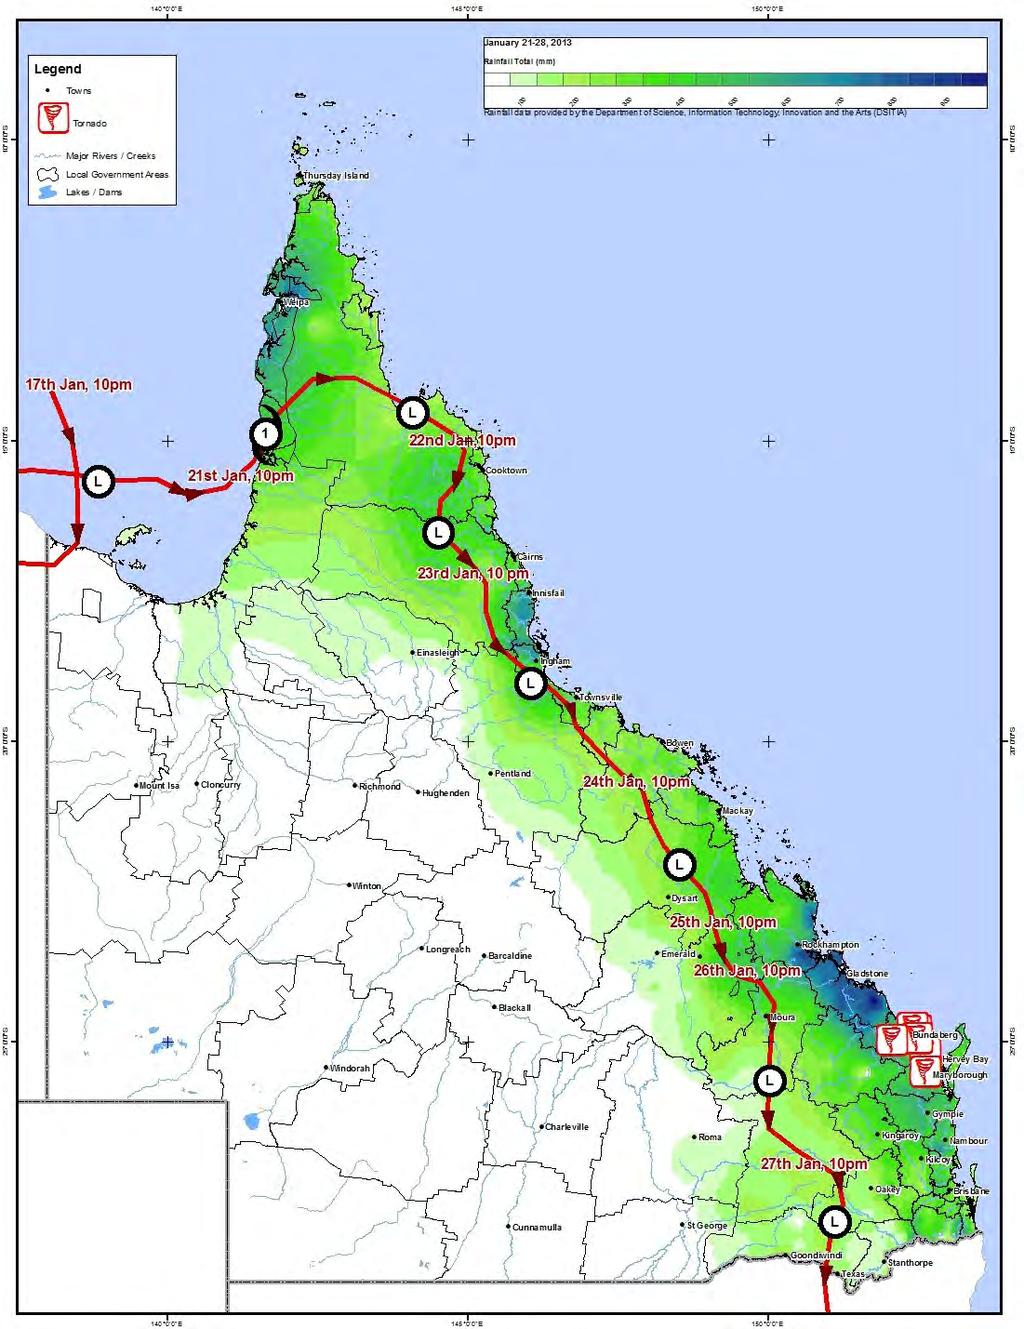 catchment was very similar to that in the 2011 event. Rainfall totals experienced in the Bremer catchment ranked second behind 1974, and ahead of 2011 (Source: Bureau of Meteorology, 2013).